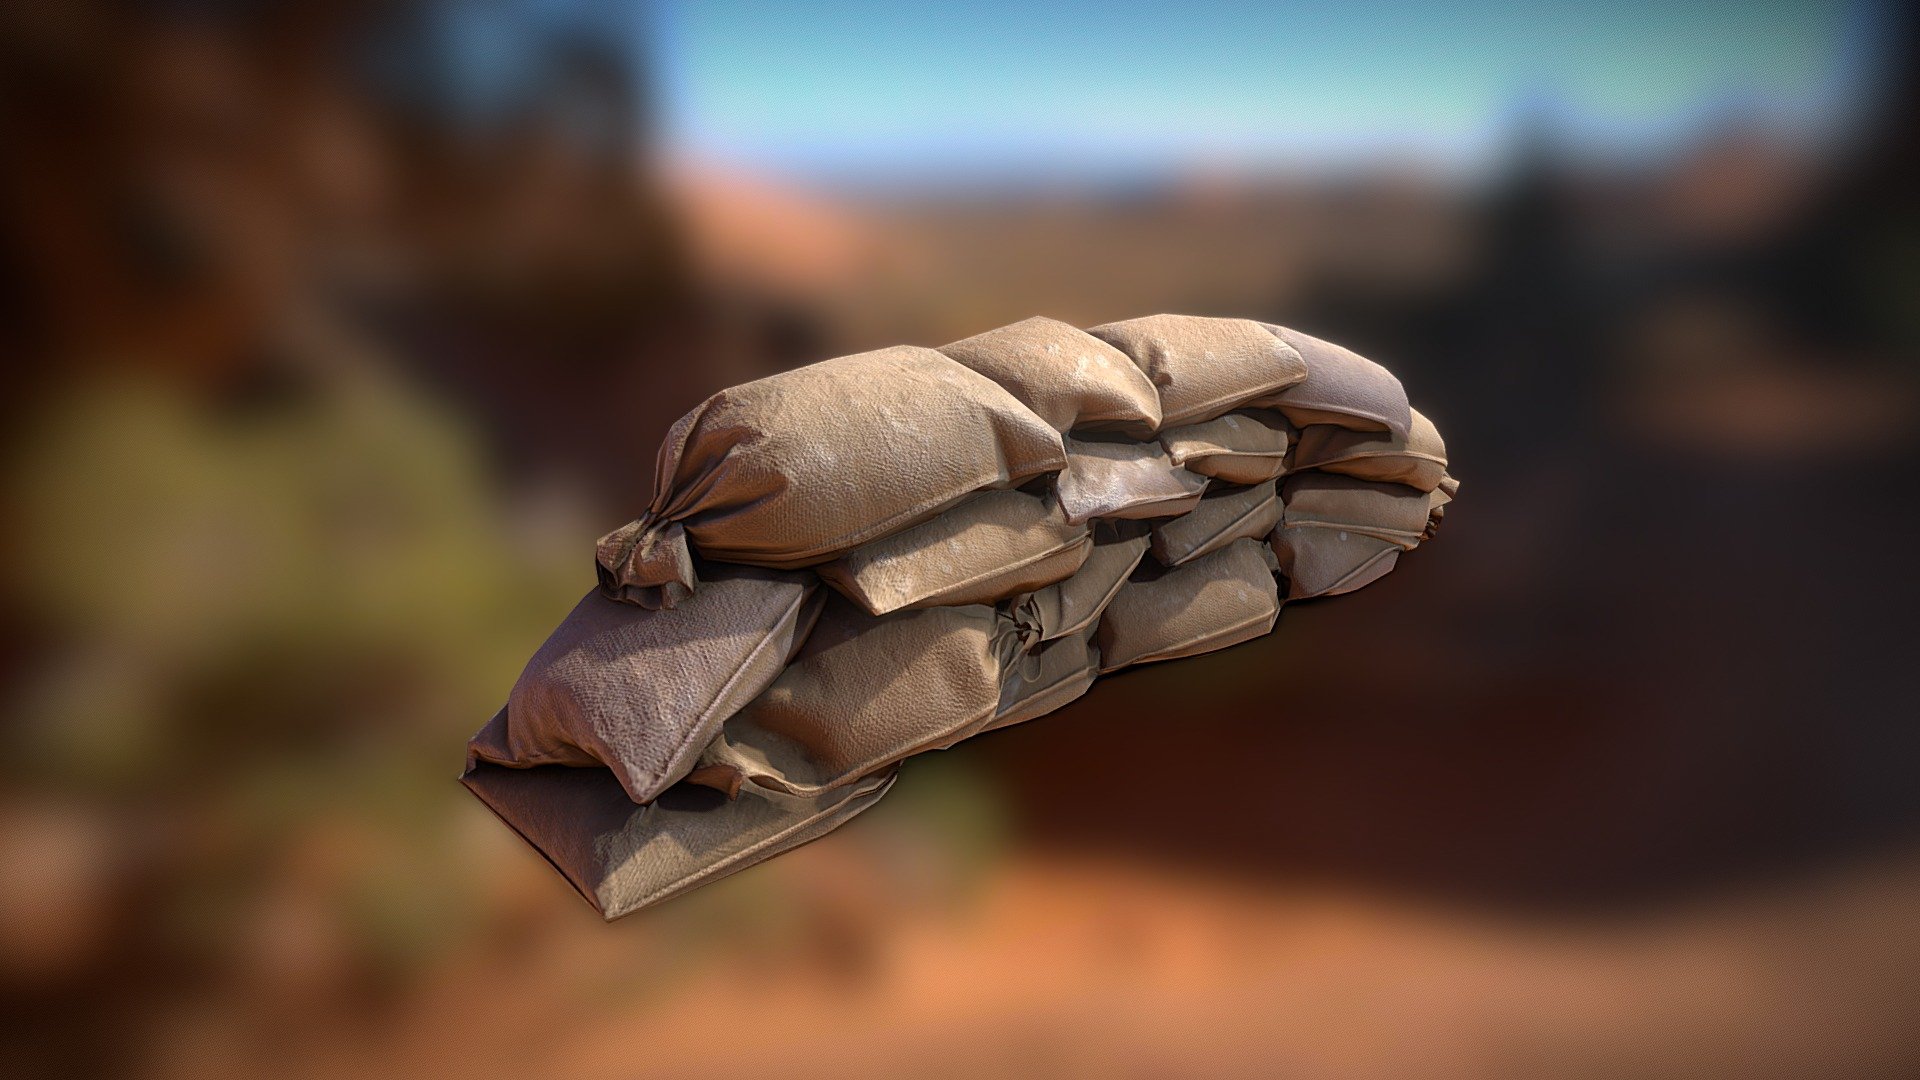 Sandbags mostly modeled in Marvelous Designer, with some tweaking and retopology in Zbrush. Textured in Substance Painter 3d model